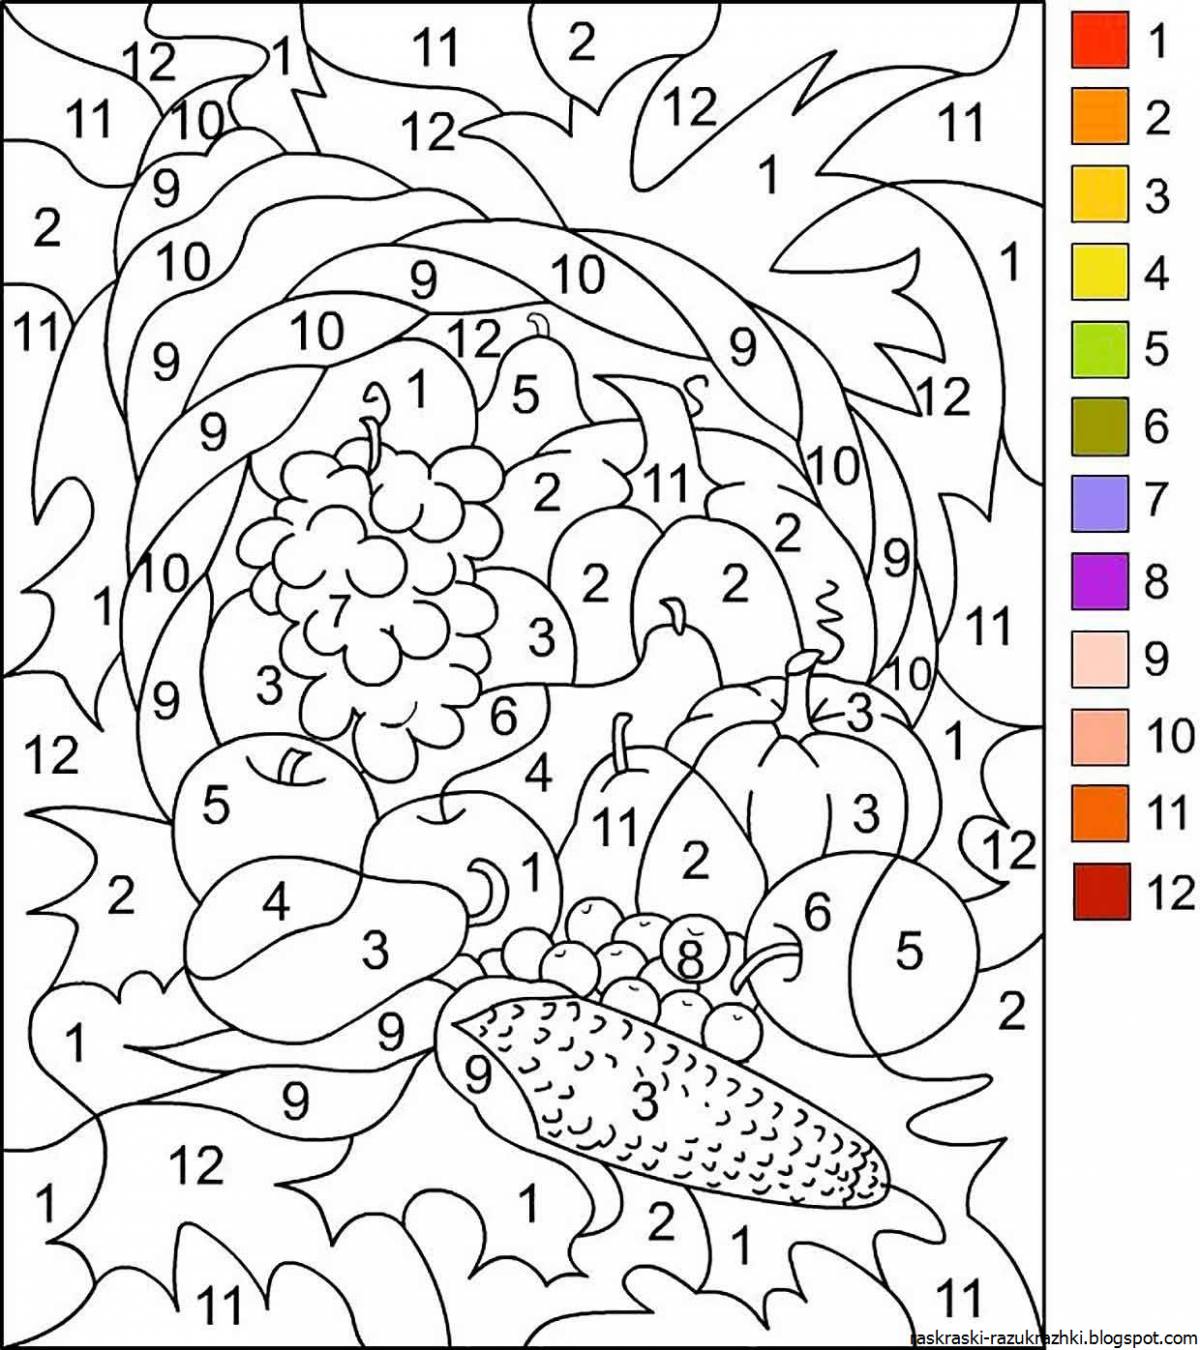 Bright coloring by numbers